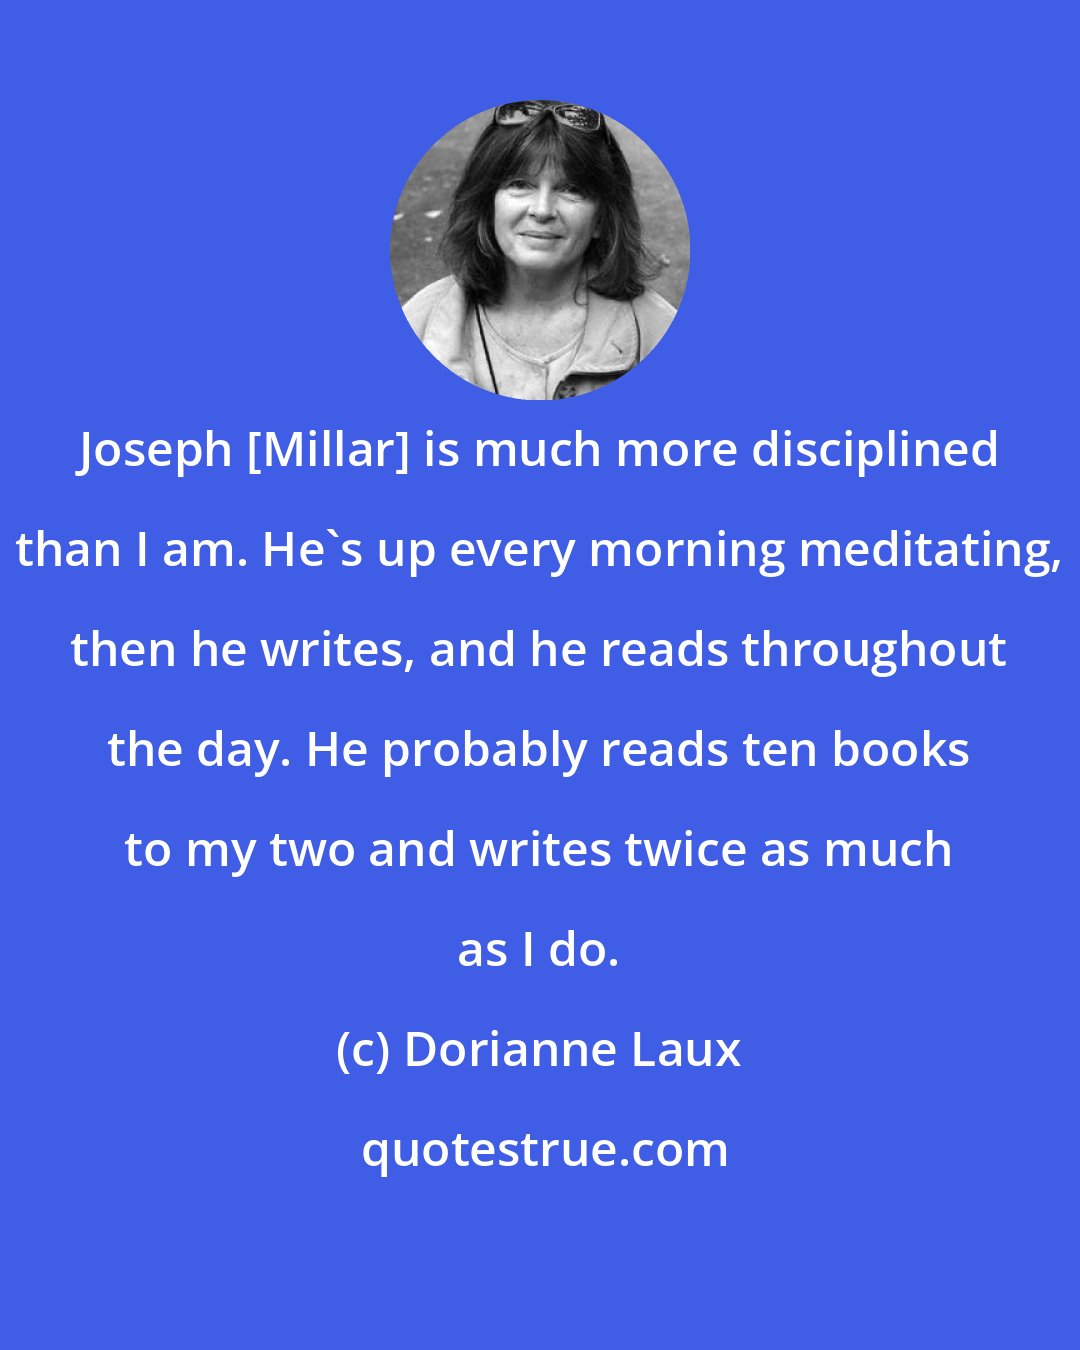 Dorianne Laux: Joseph [Millar] is much more disciplined than I am. He's up every morning meditating, then he writes, and he reads throughout the day. He probably reads ten books to my two and writes twice as much as I do.